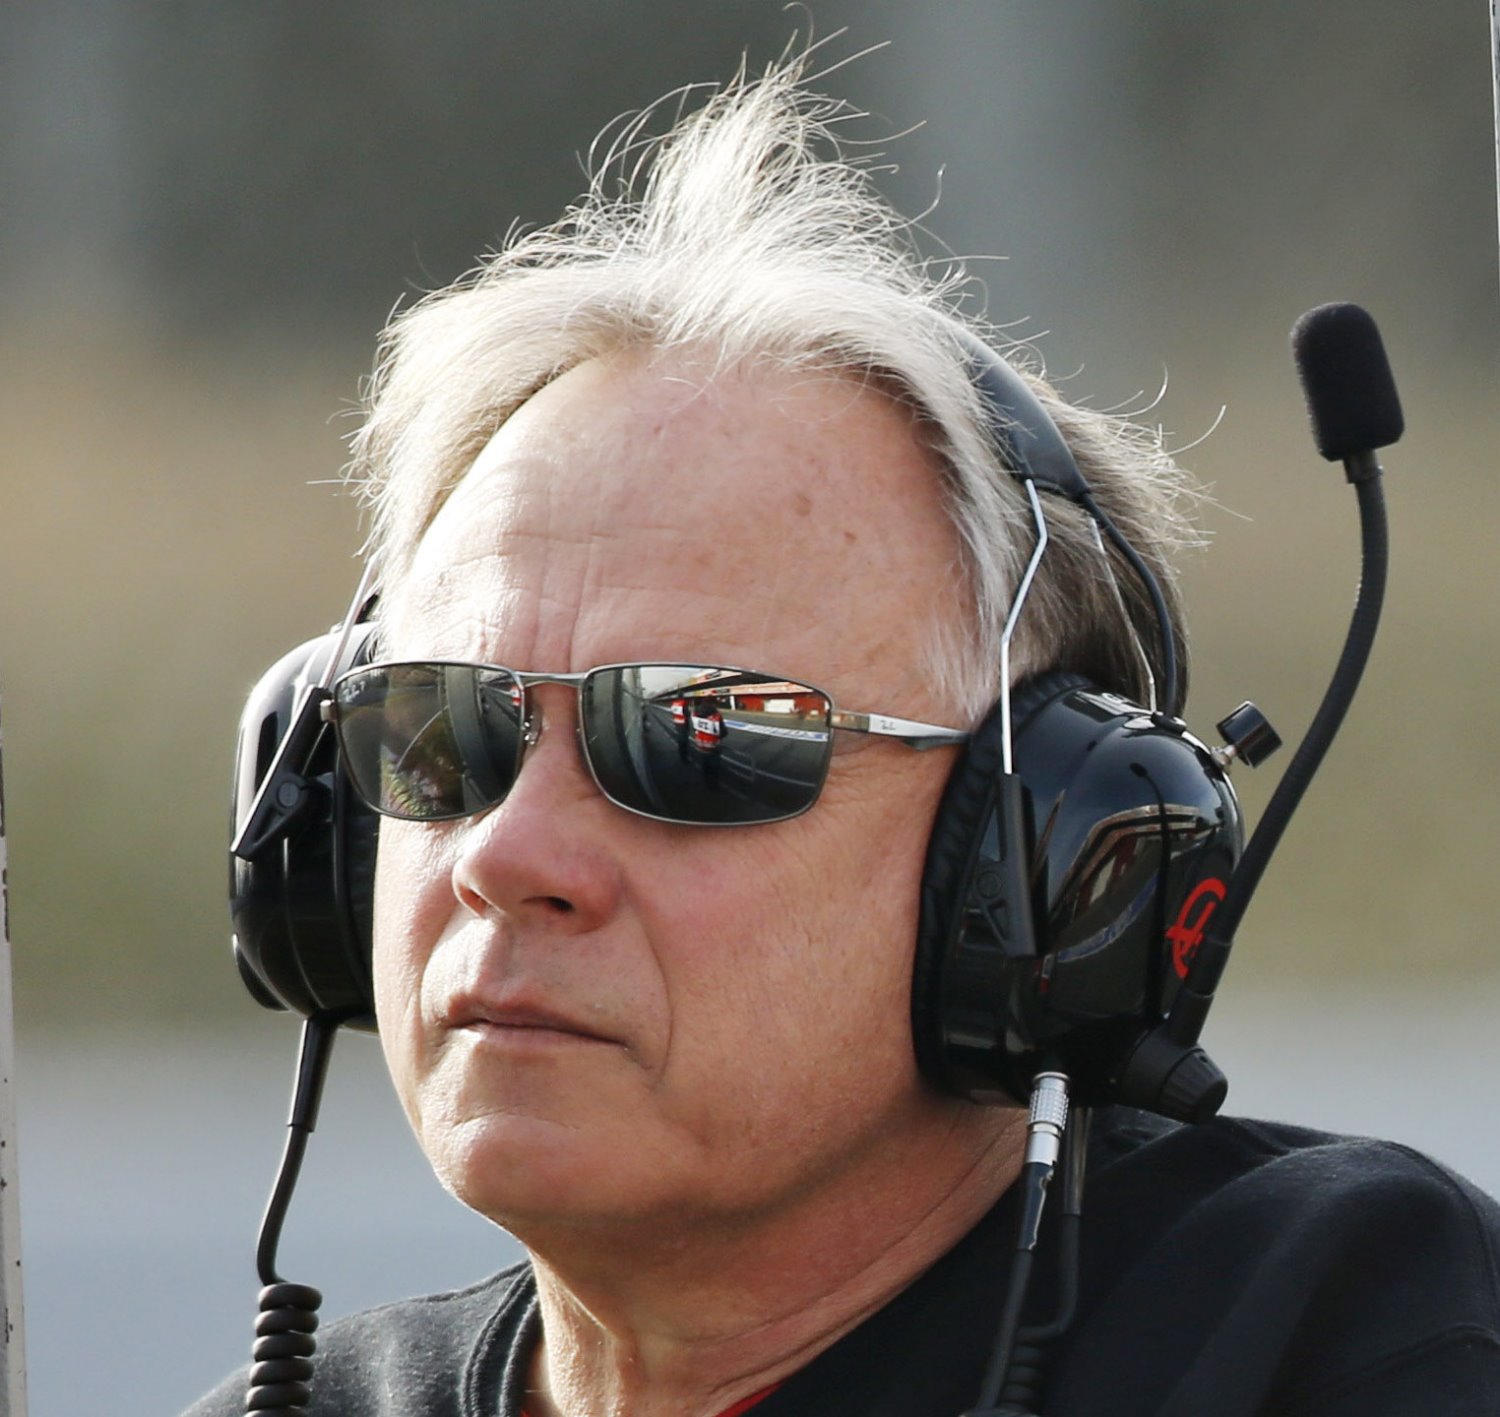 Would Rossi tell Gene Haas to go pound sand should he now come calling?